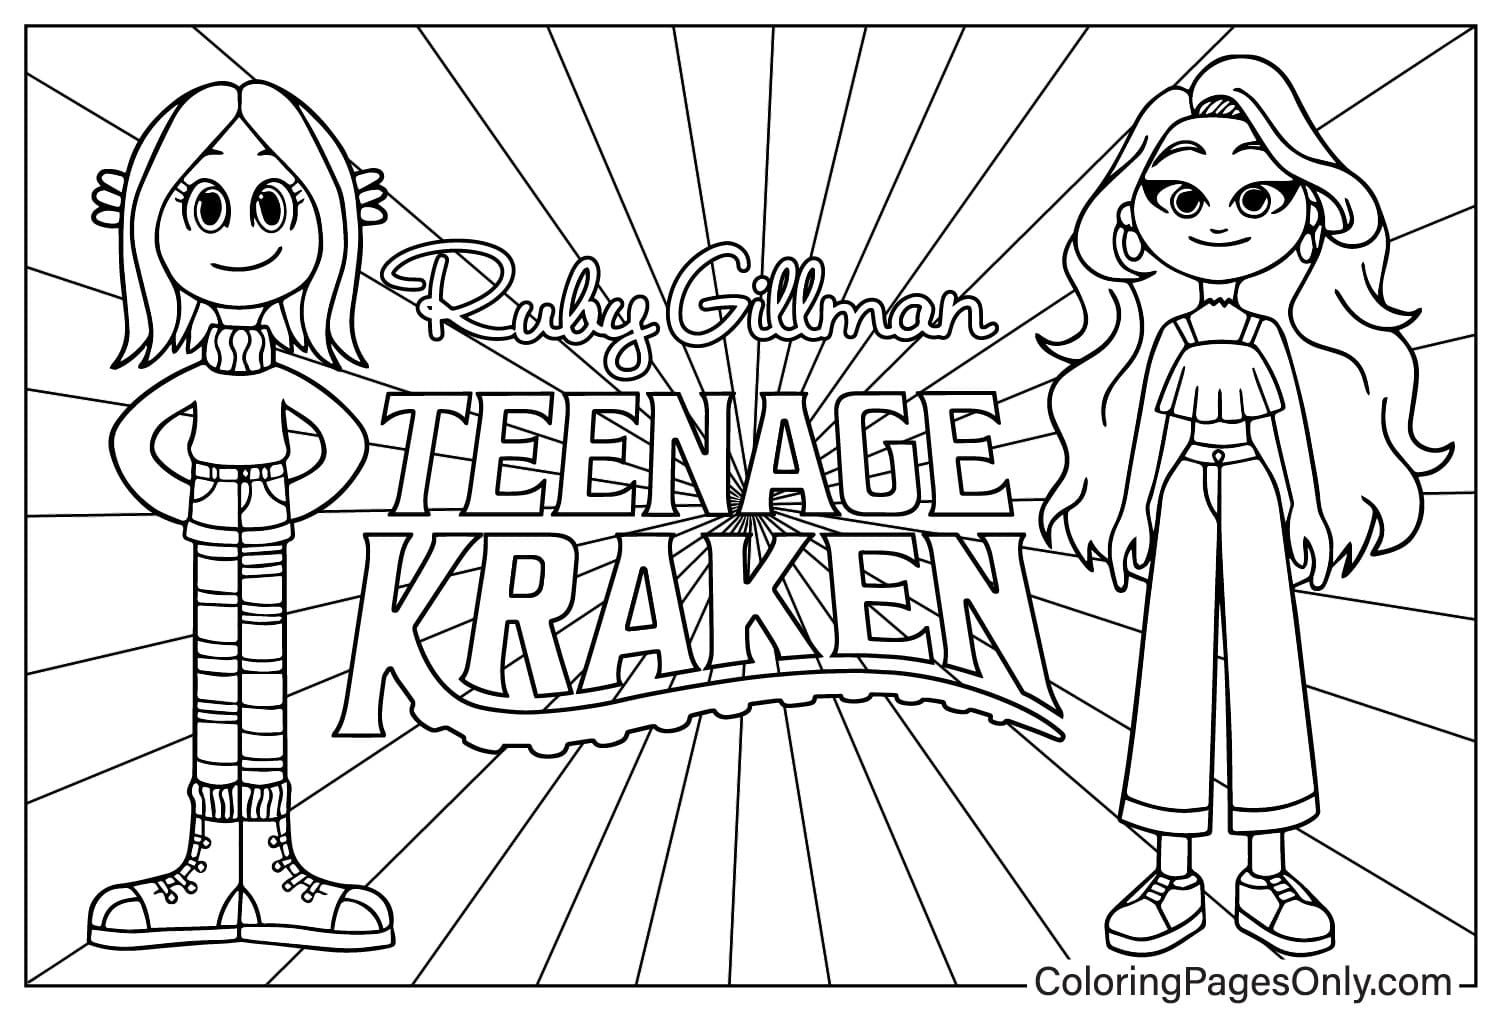 Ruby Gillman and Chelsea Coloring Page from Ruby Gillman Teenage Kraken